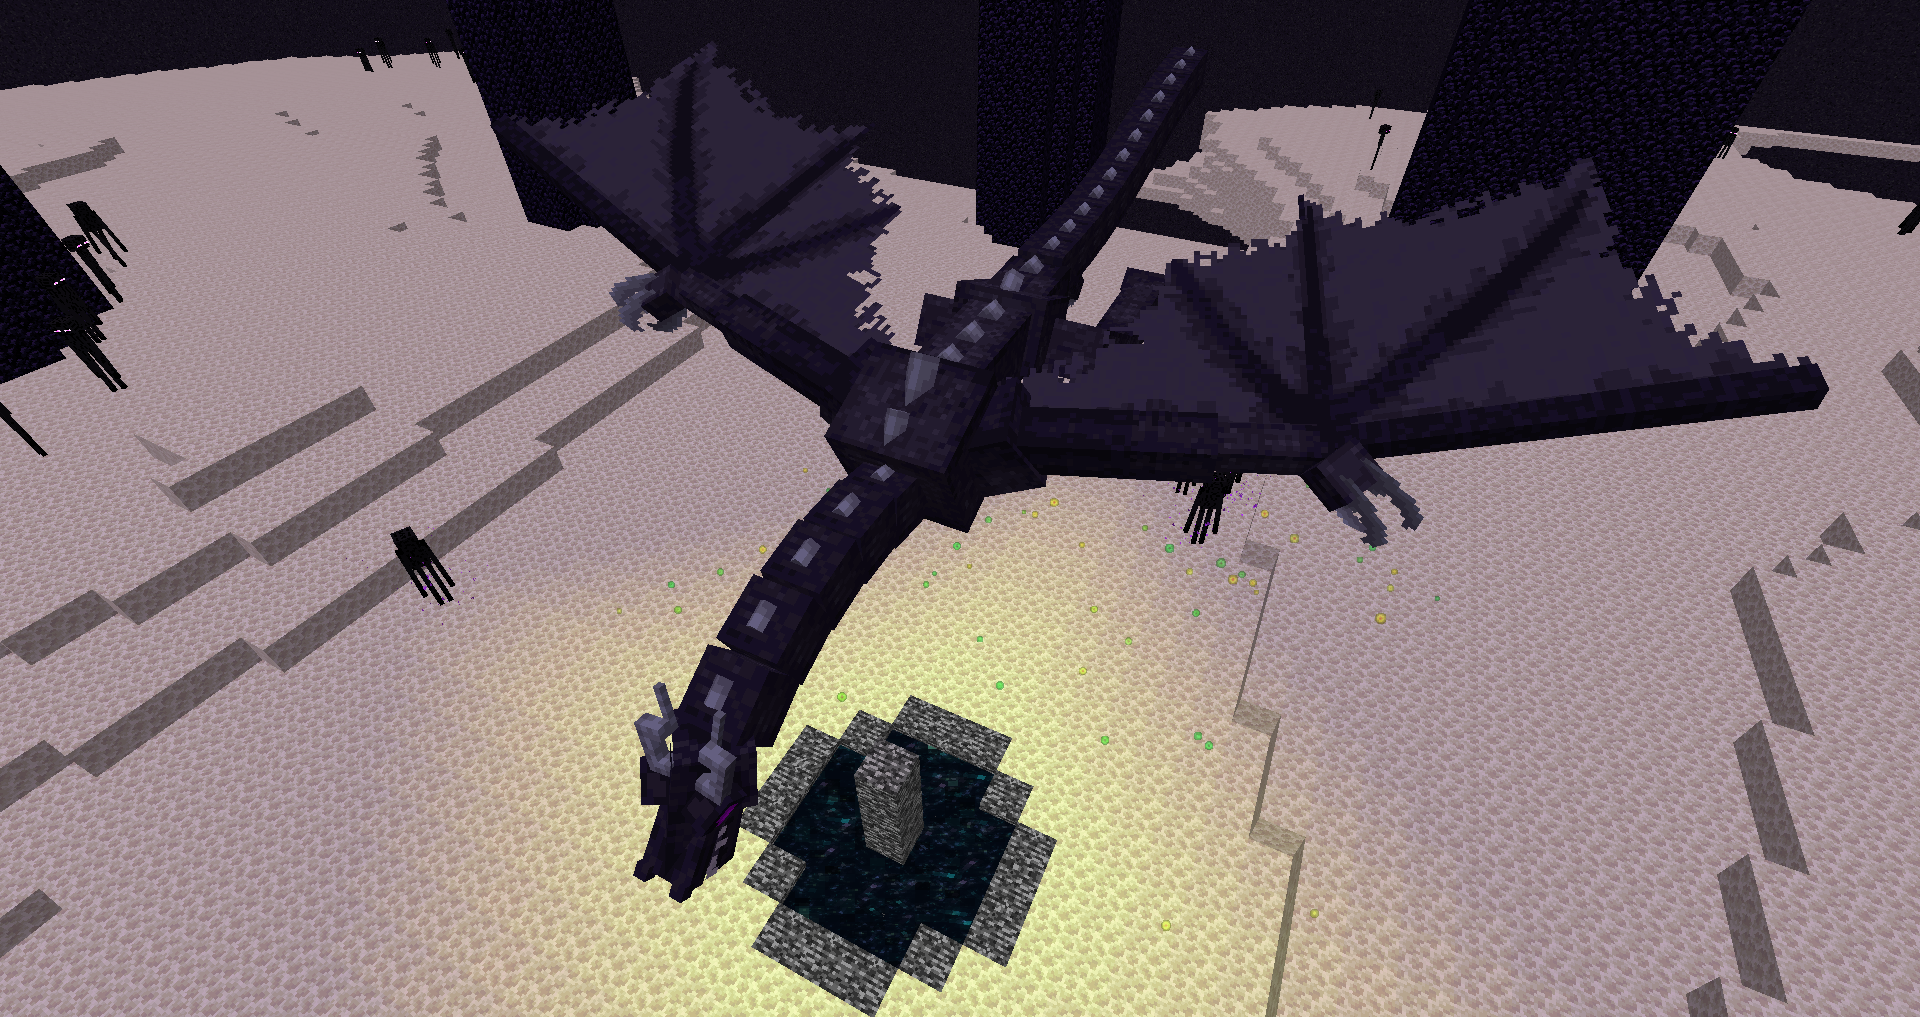 Every S-tier pack needs a cool custom Ender Dragon